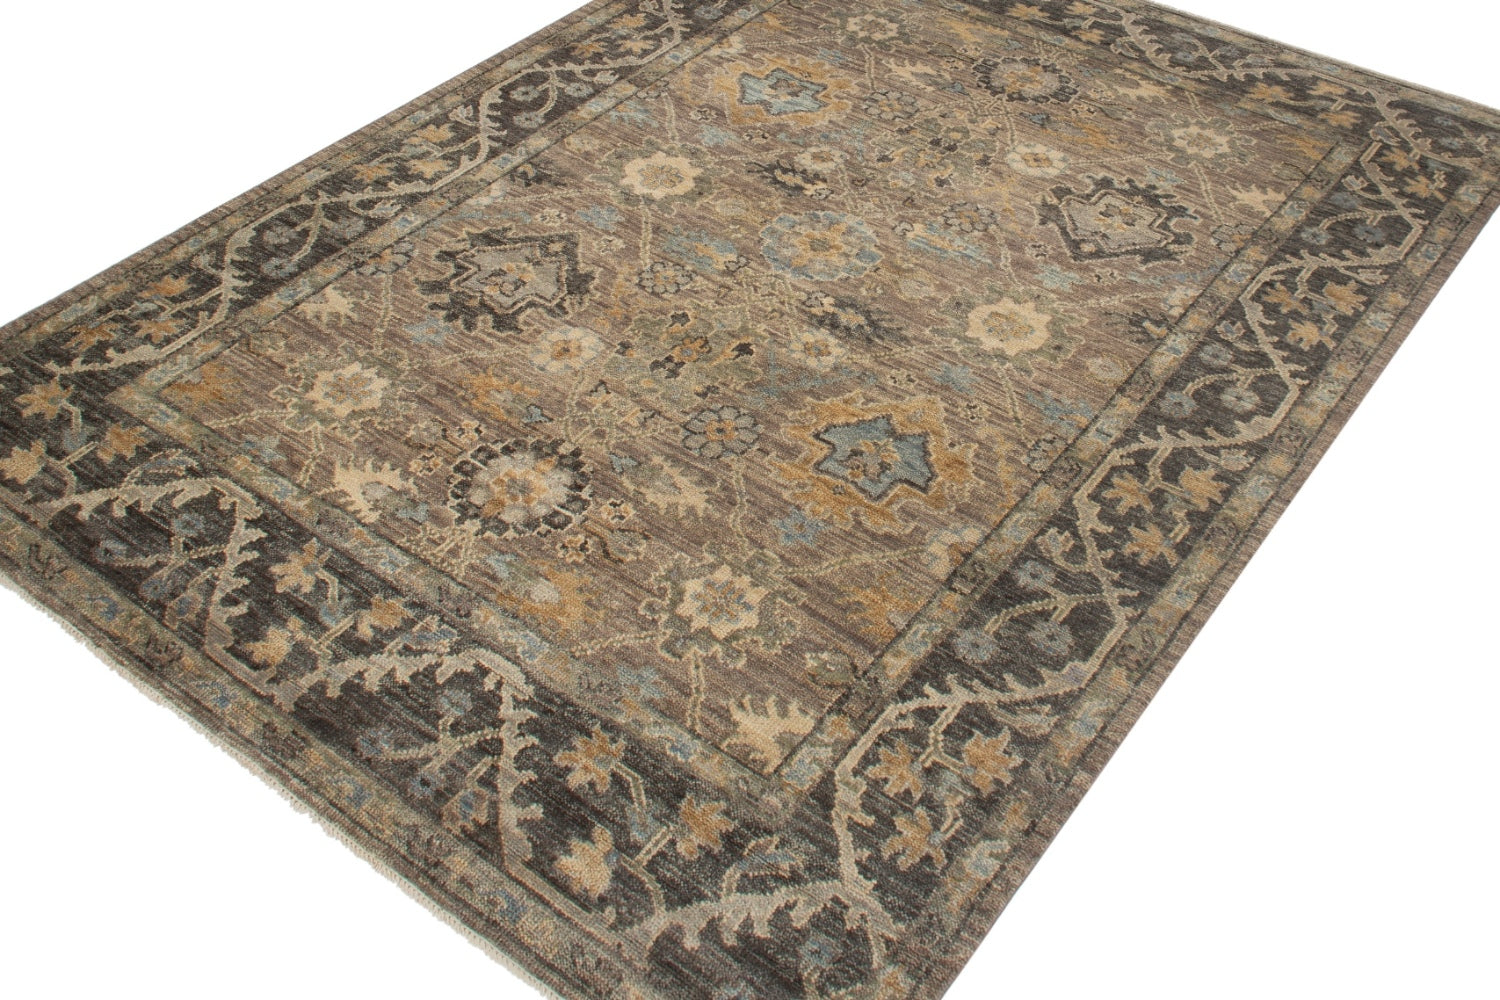 Sultanabad 2 Handwoven Traditional Rug, J71729